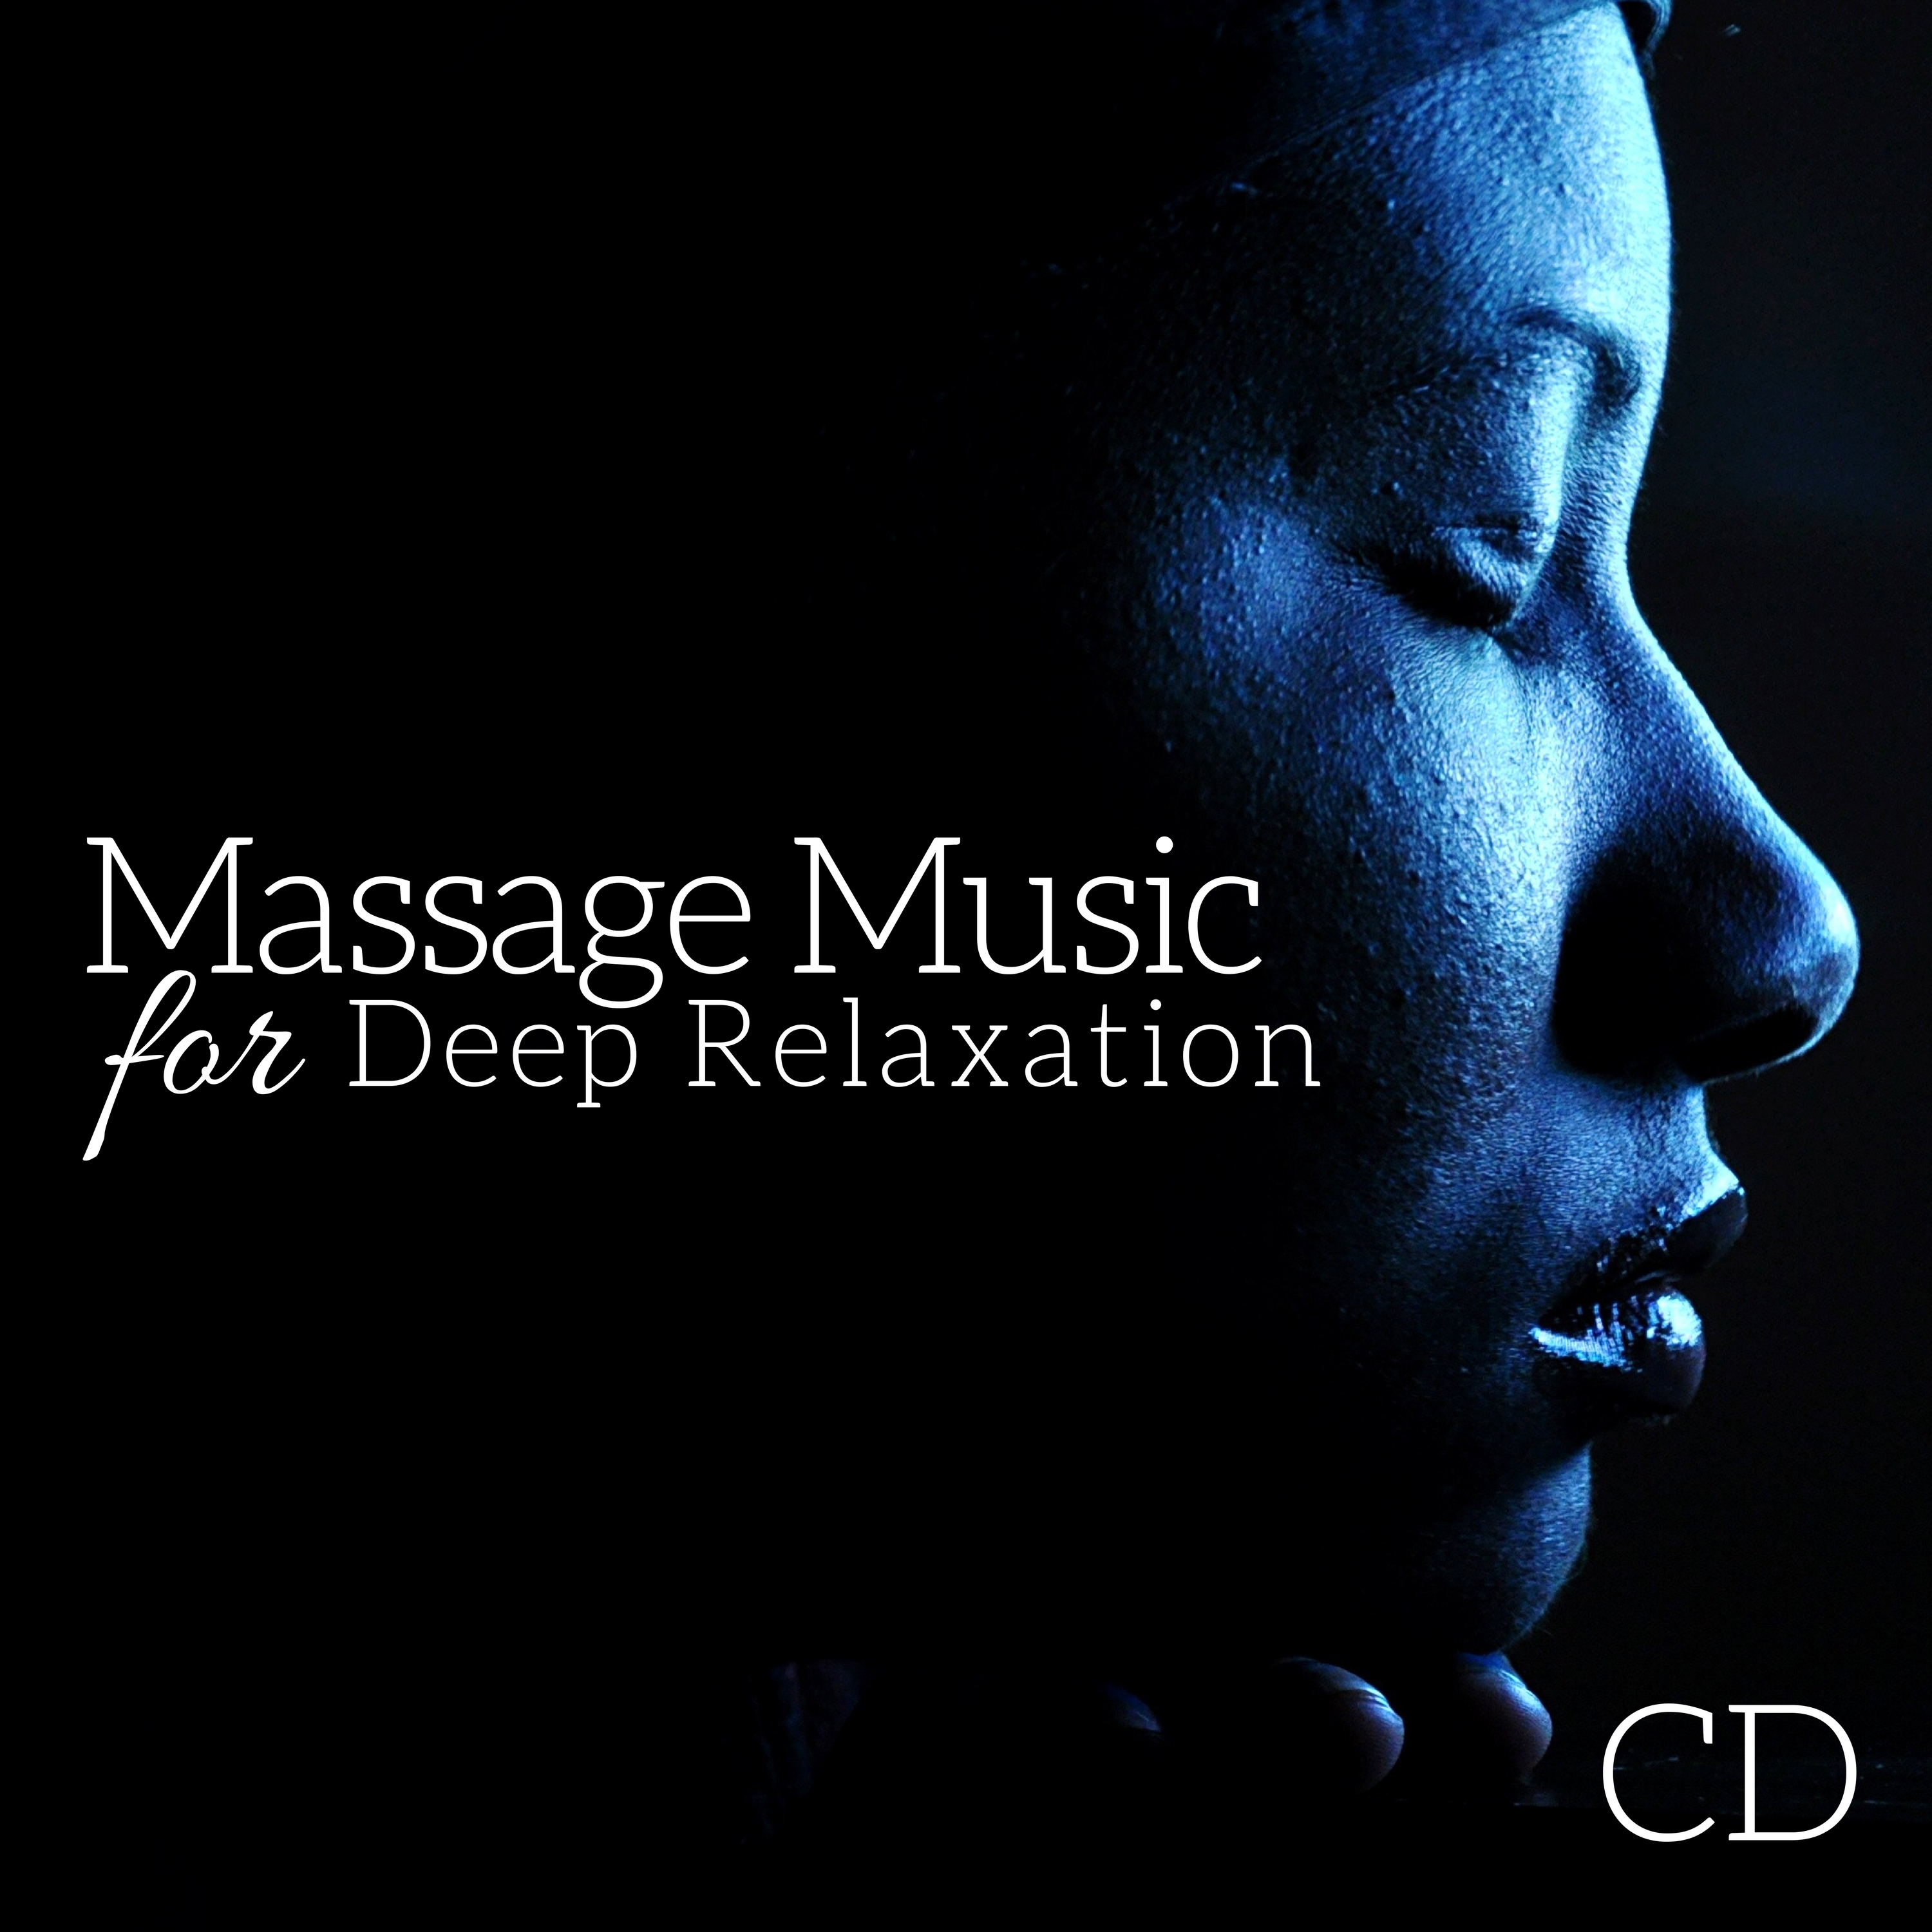 Massage Music for Deep Relaxation CD